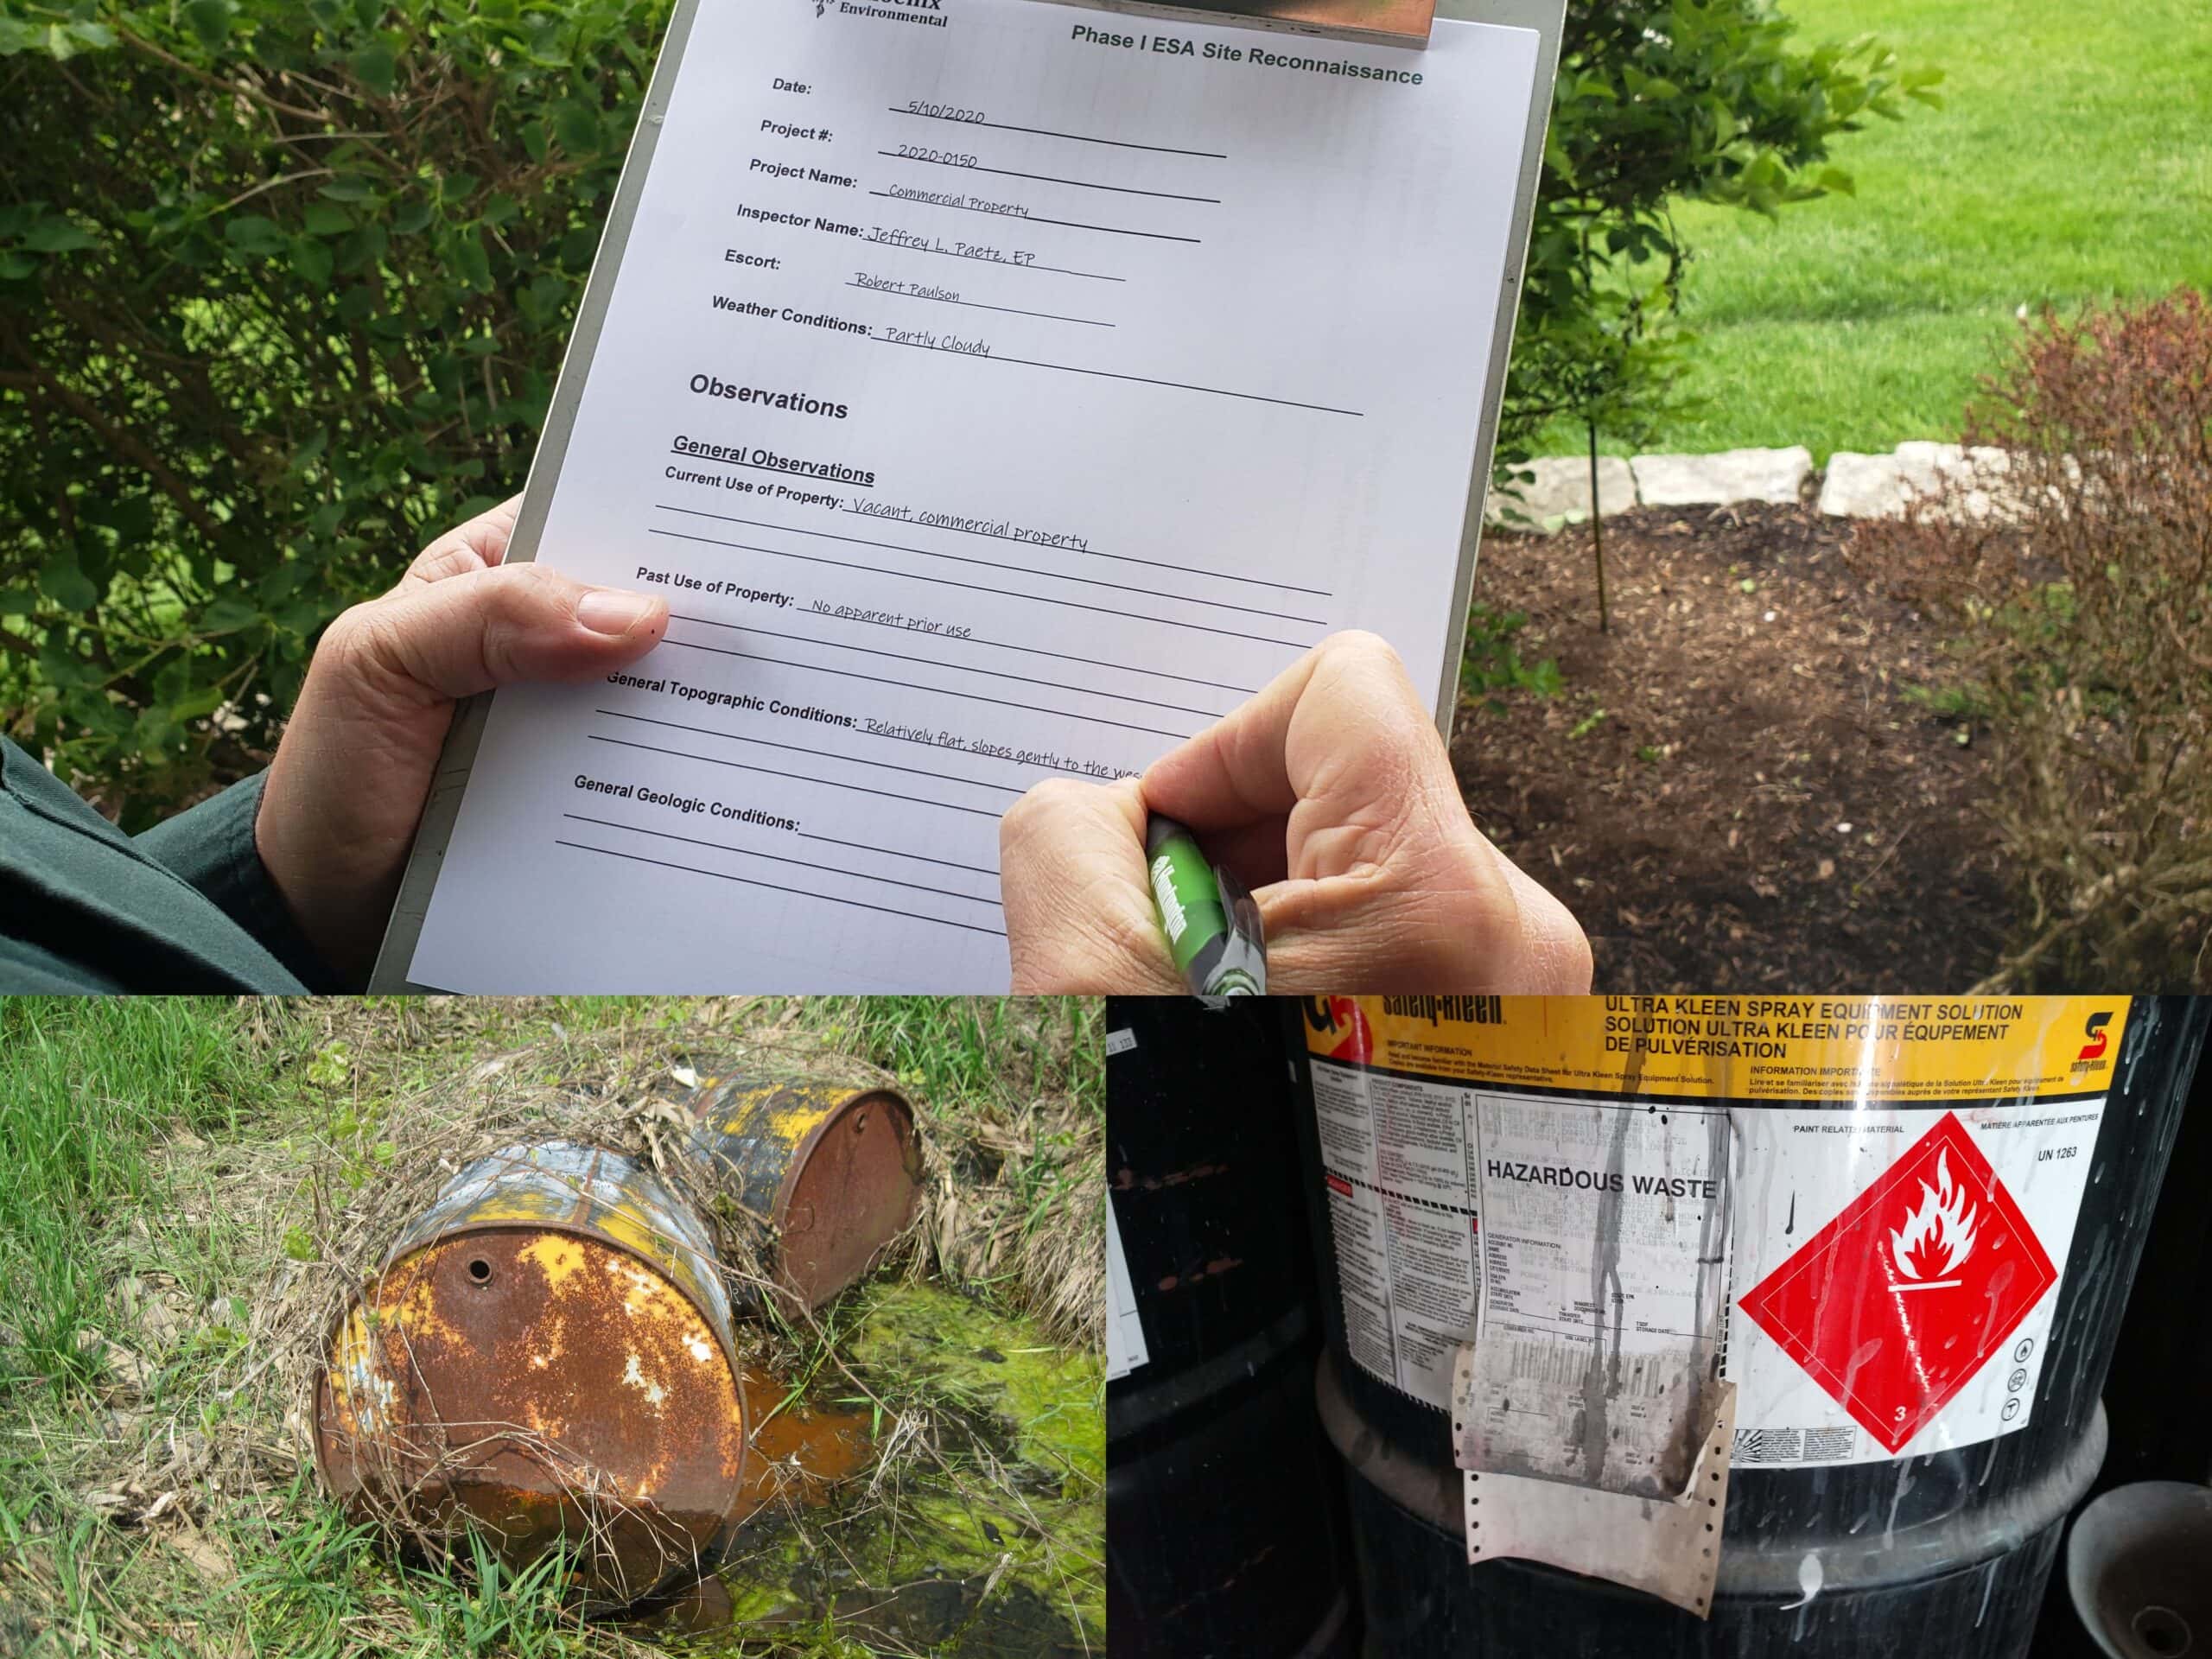 A collage showing a Phase I ESA checklist being filled out on a clipboard, two waste drums in a grassy area and another drum labeled "hazardous waste".